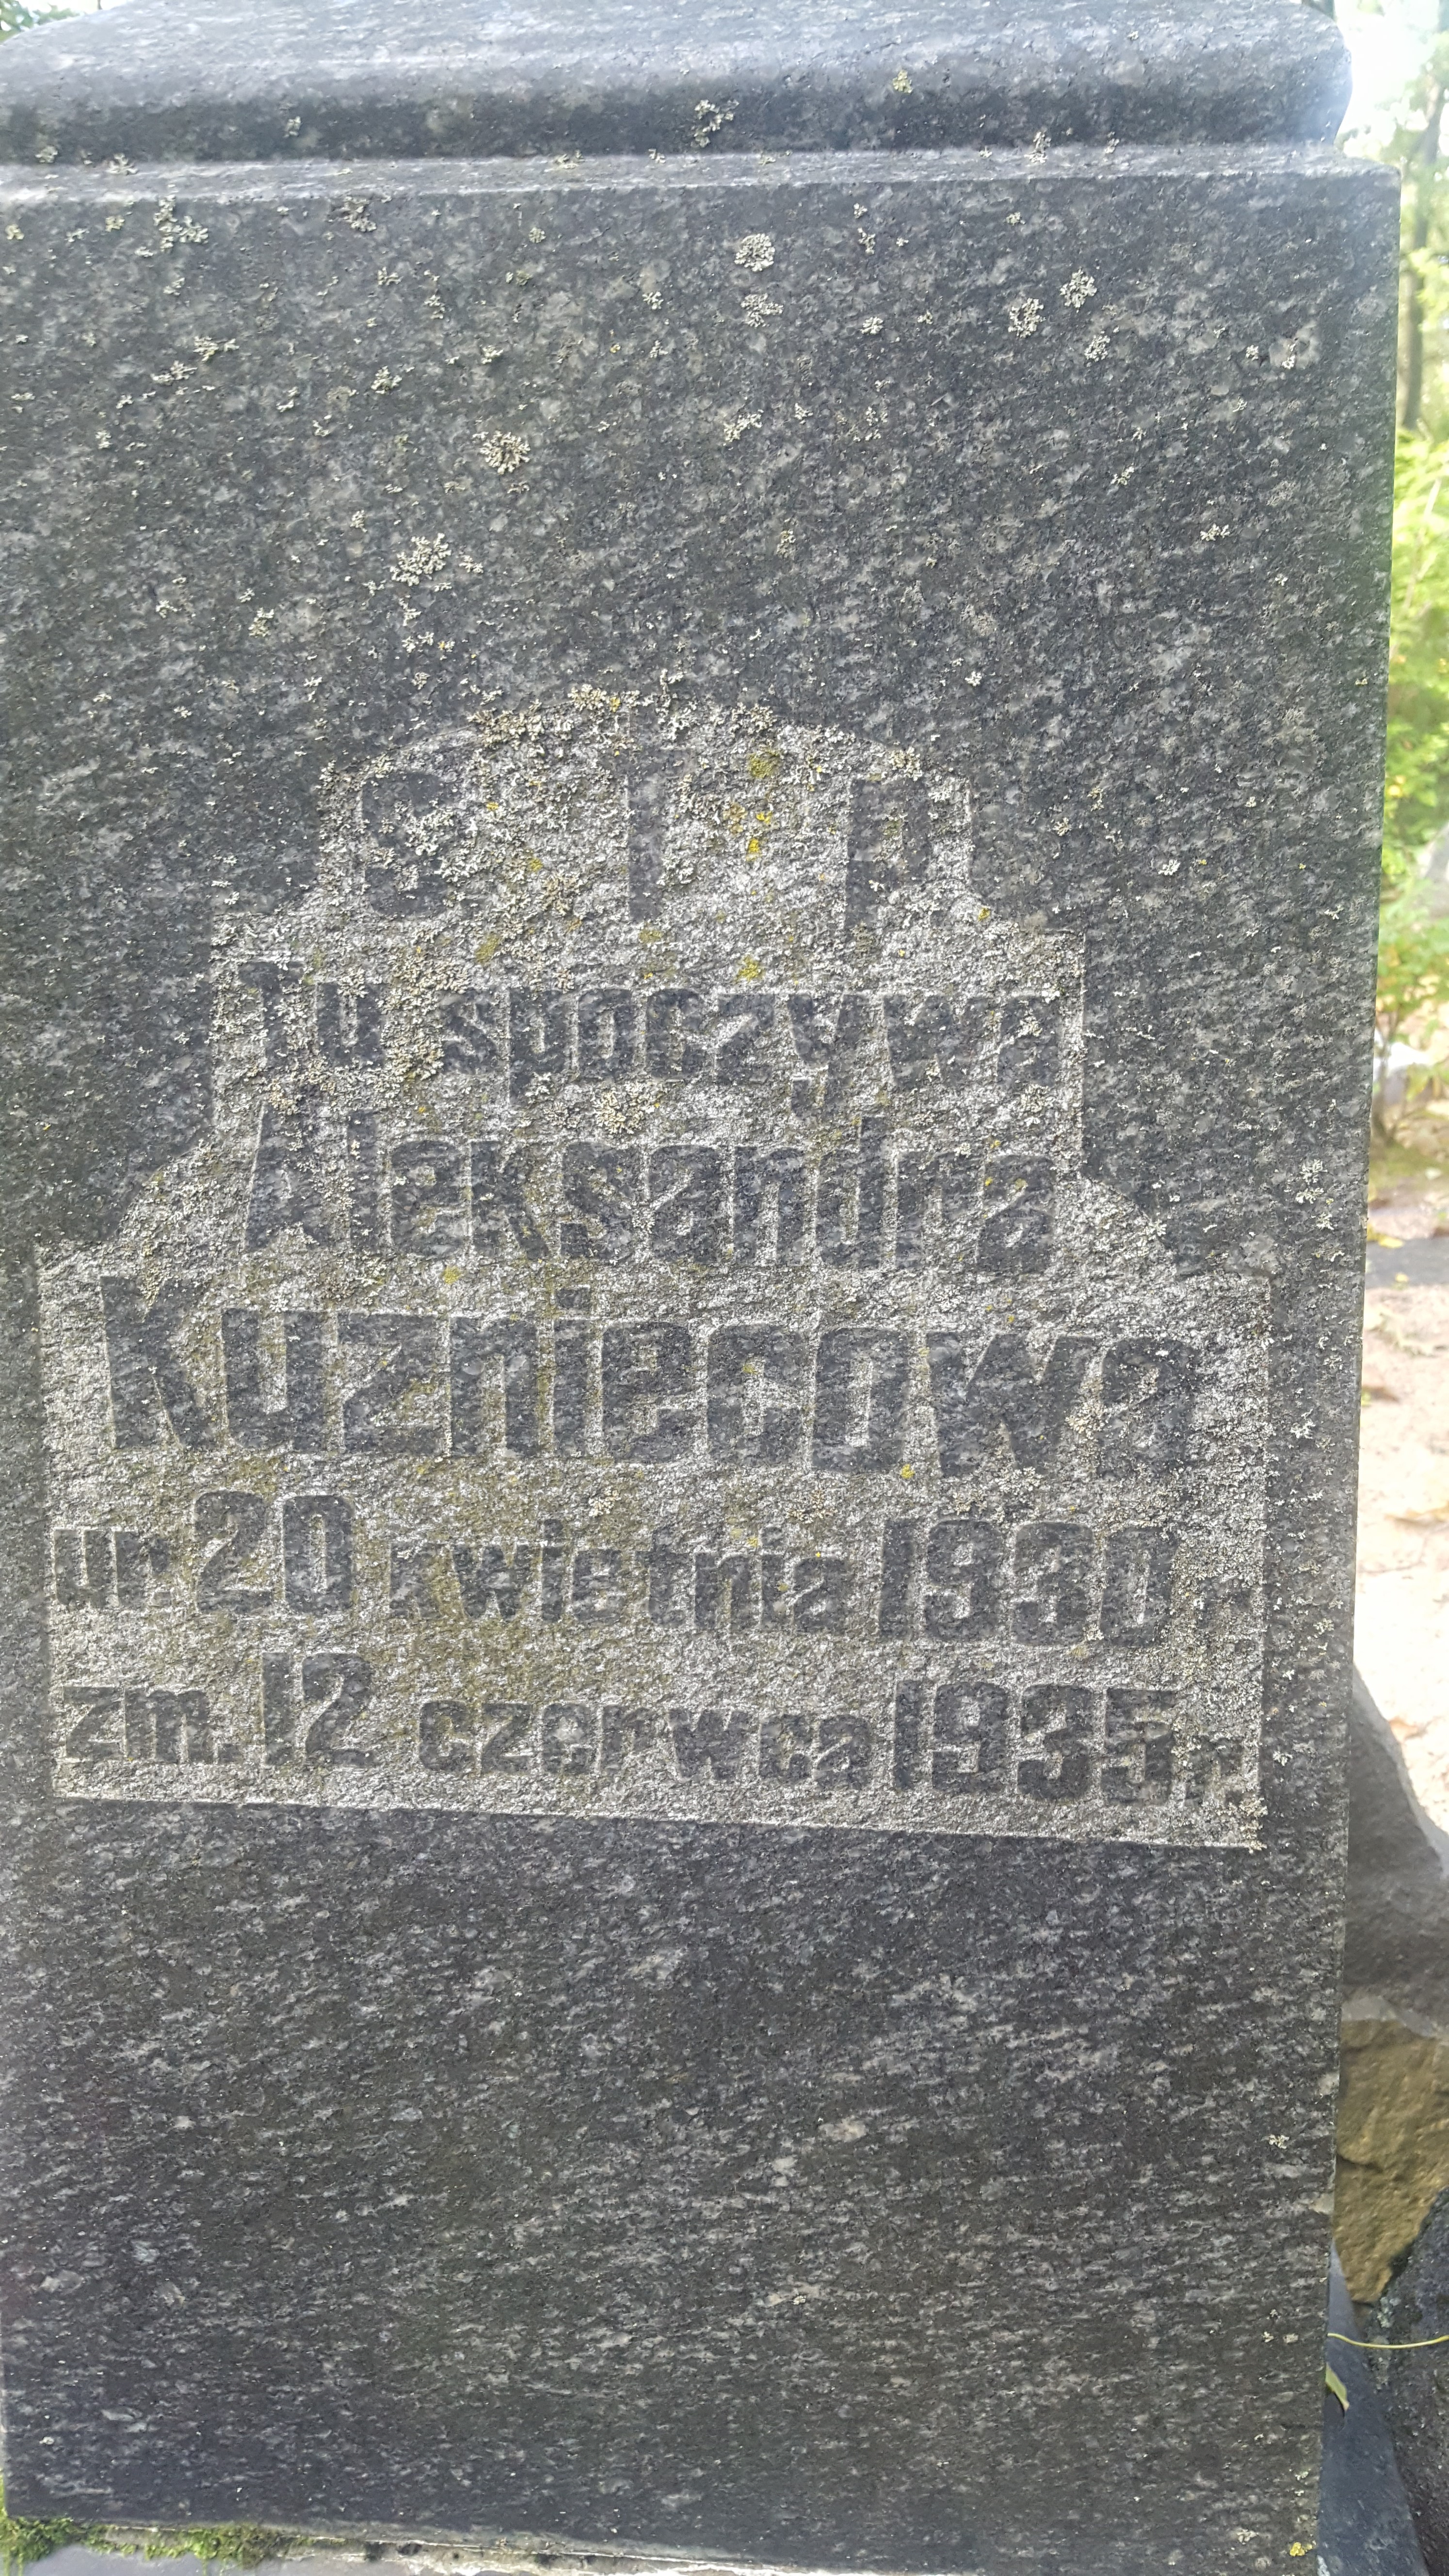 Inscription from the tombstone of Alexander Kuznetsov, St Michael's cemetery in Riga, as of 2021.